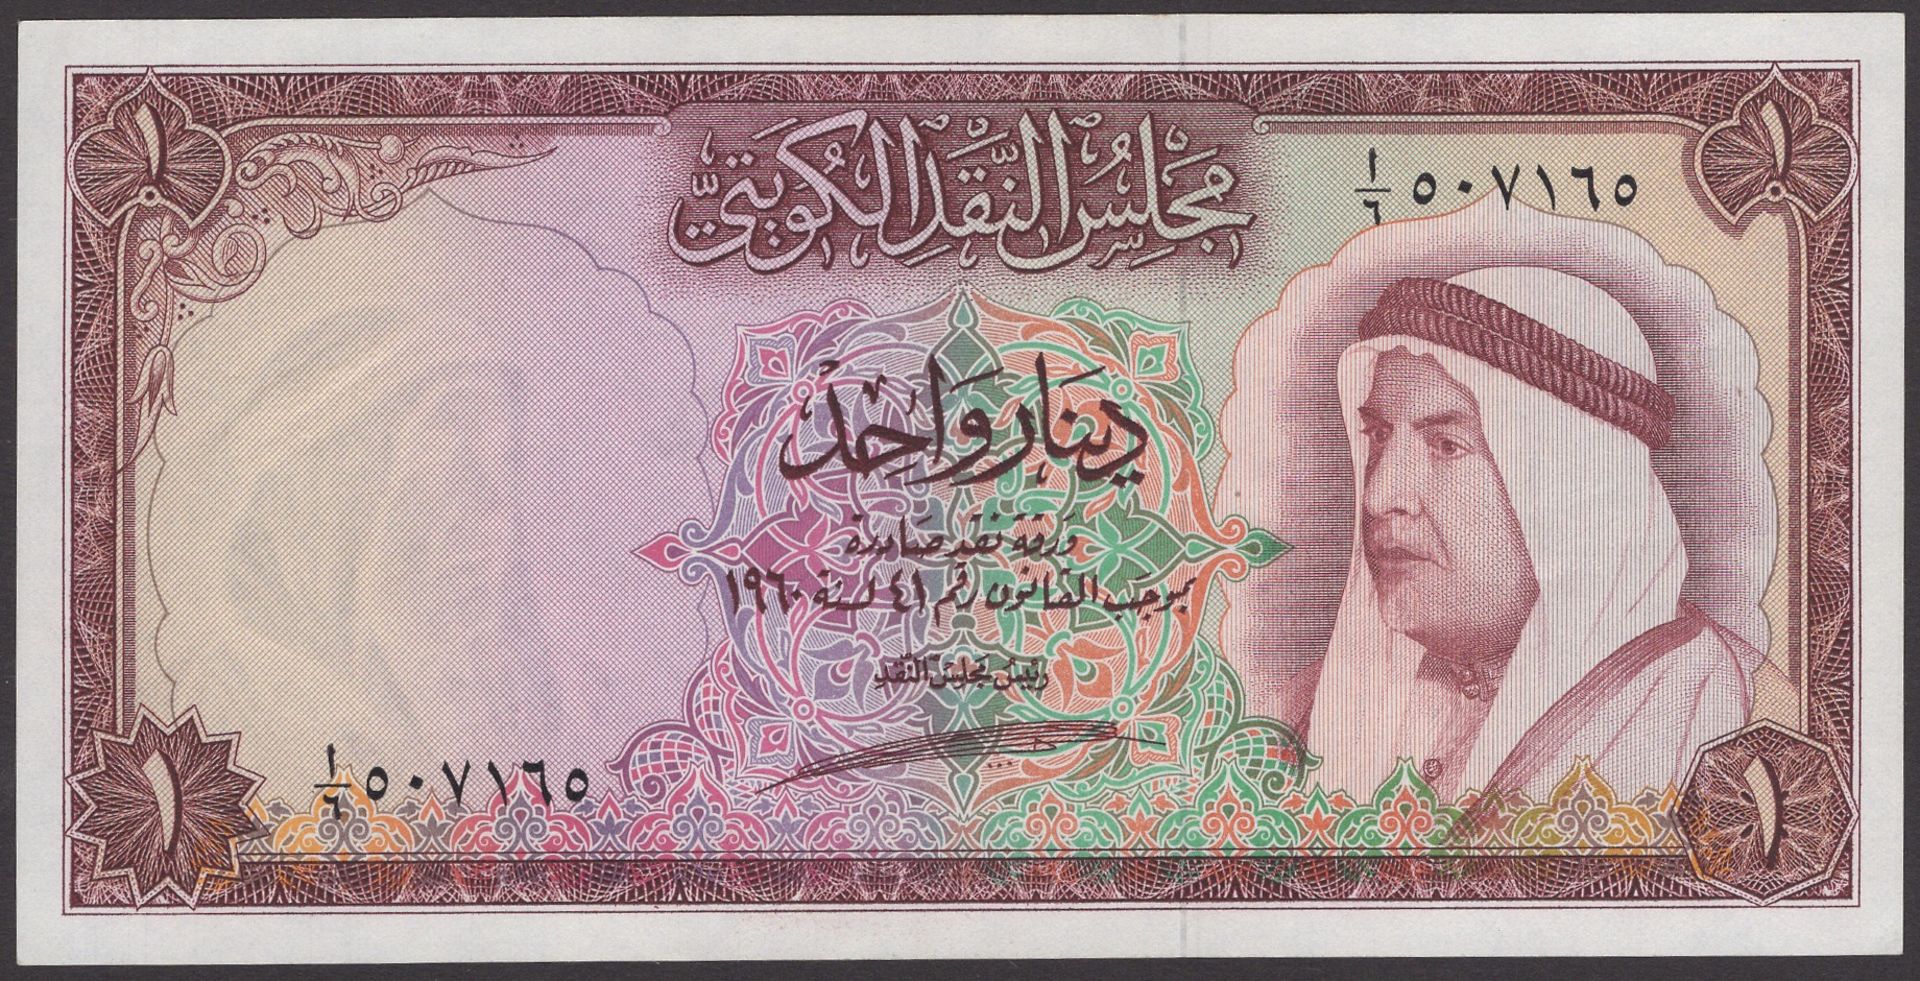 Kuwait Currency Board, 1 Dinar, ND (1961), serial number A/6 507165, Al-Sabah signature, unc...